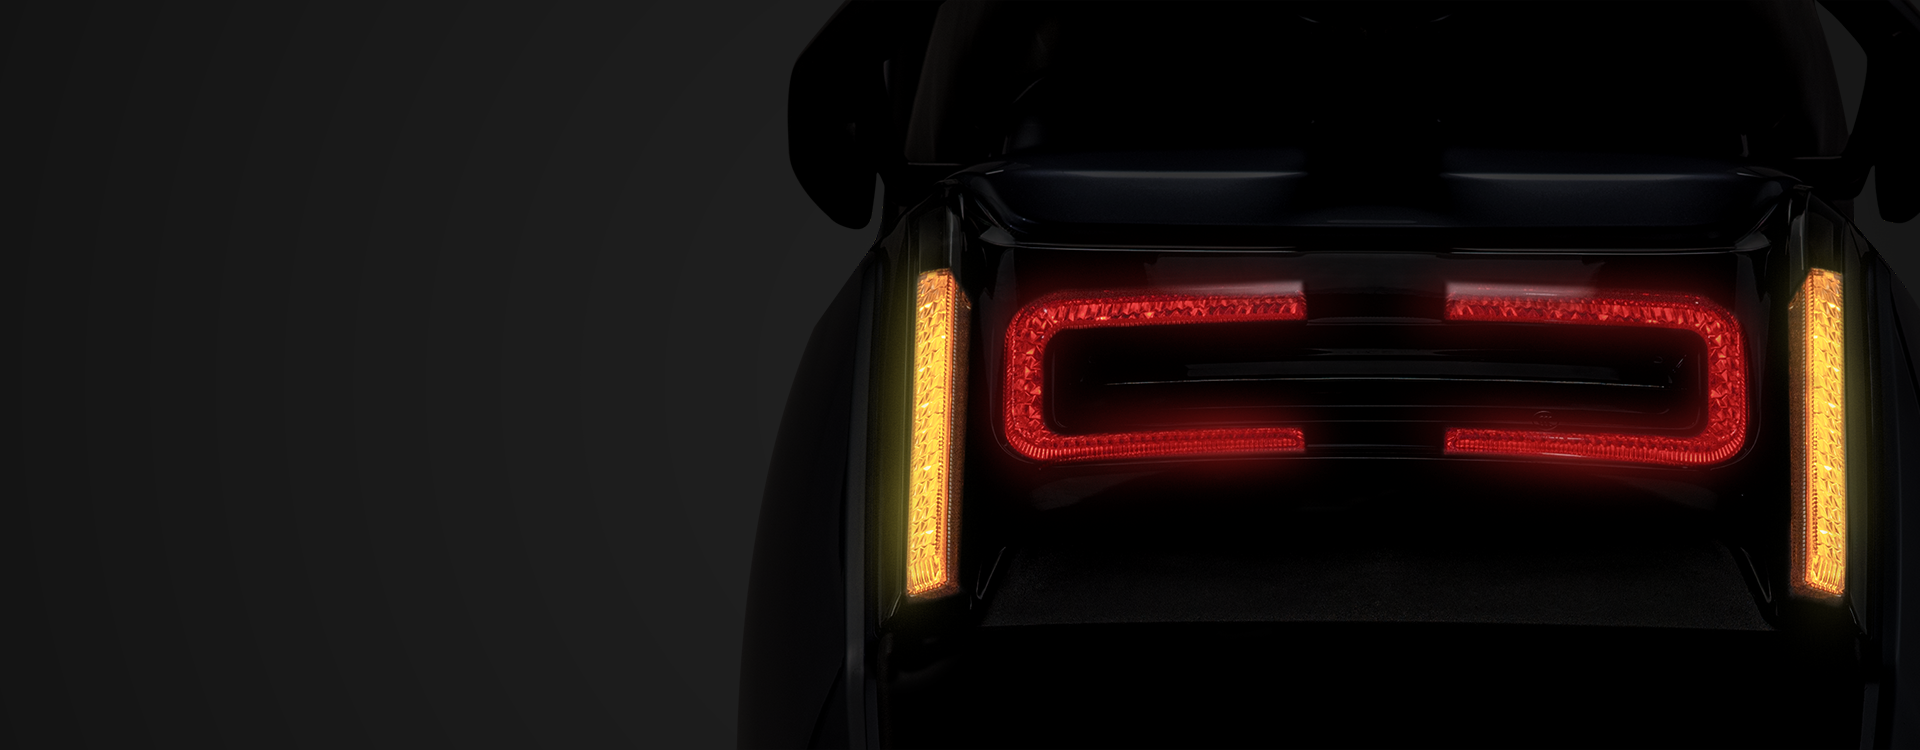 electric scooter A2 tail lights